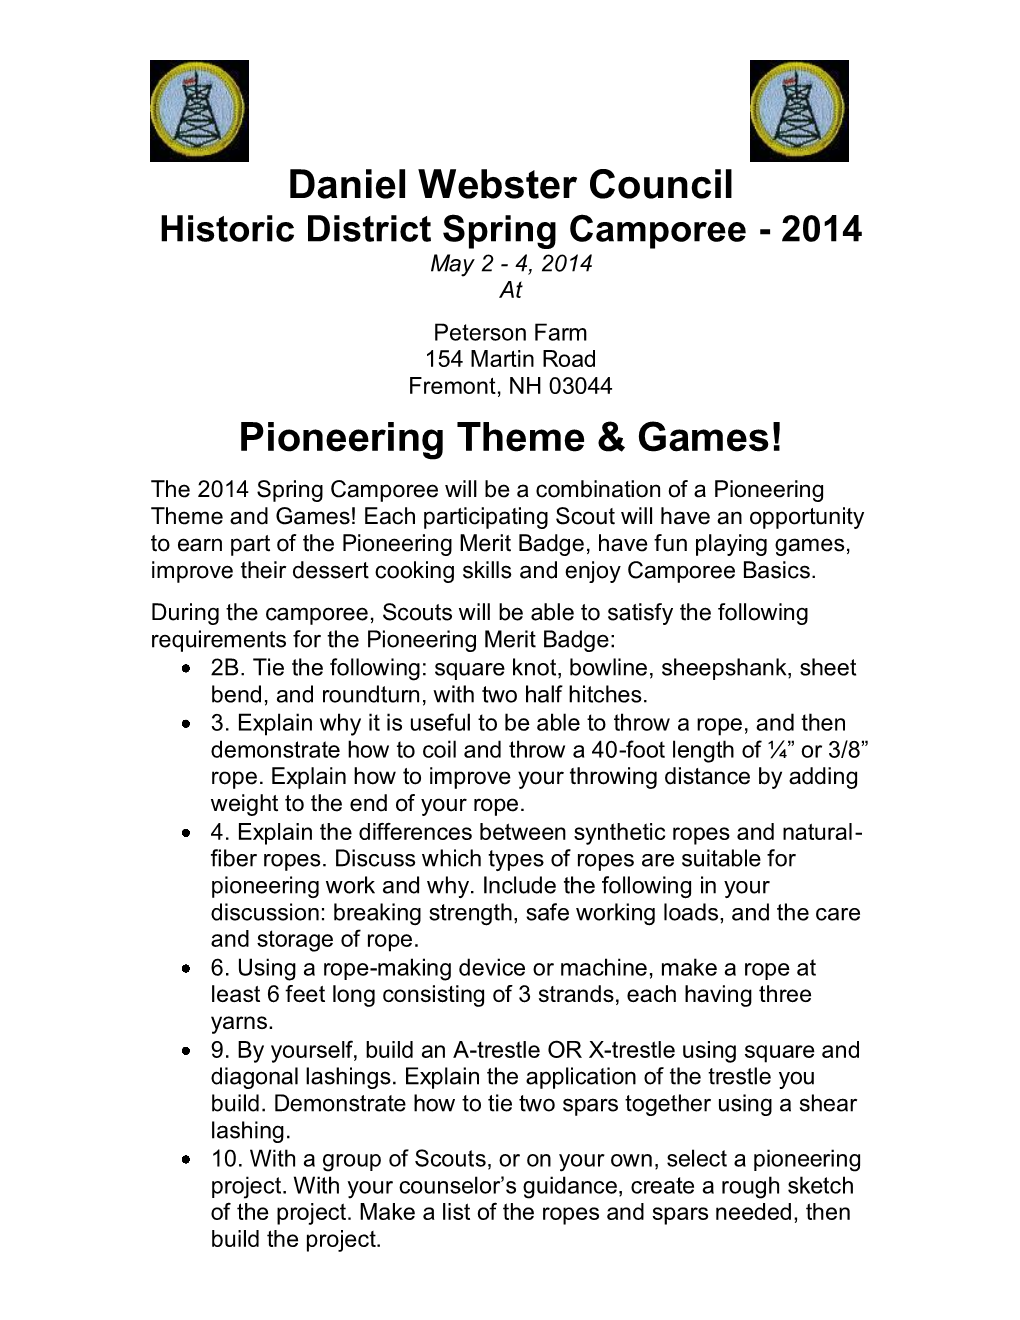 Daniel Webster Council Pioneering Theme & Games!